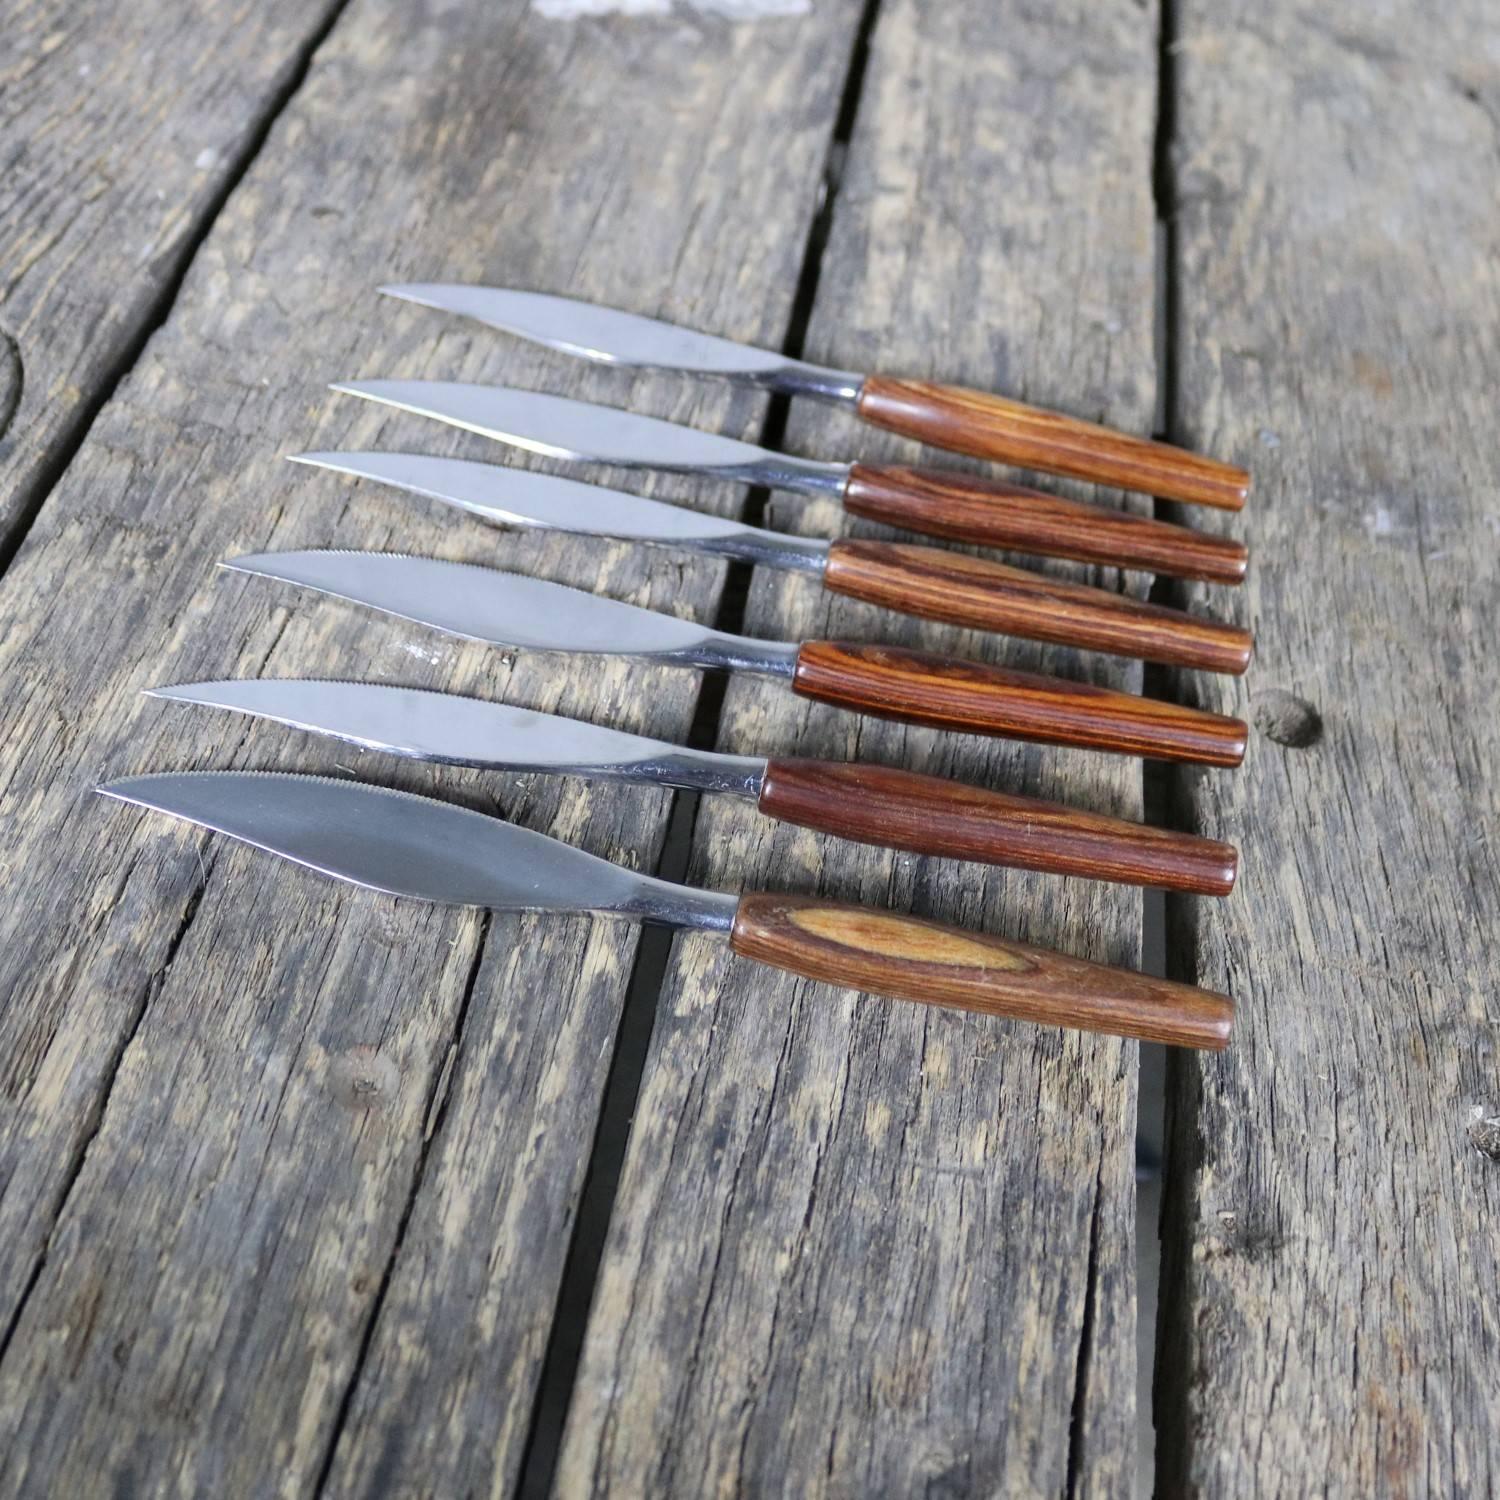 Regent Sheffield Cutlery Teak and Stainless Mode Danish Steak Knives and Serving 1